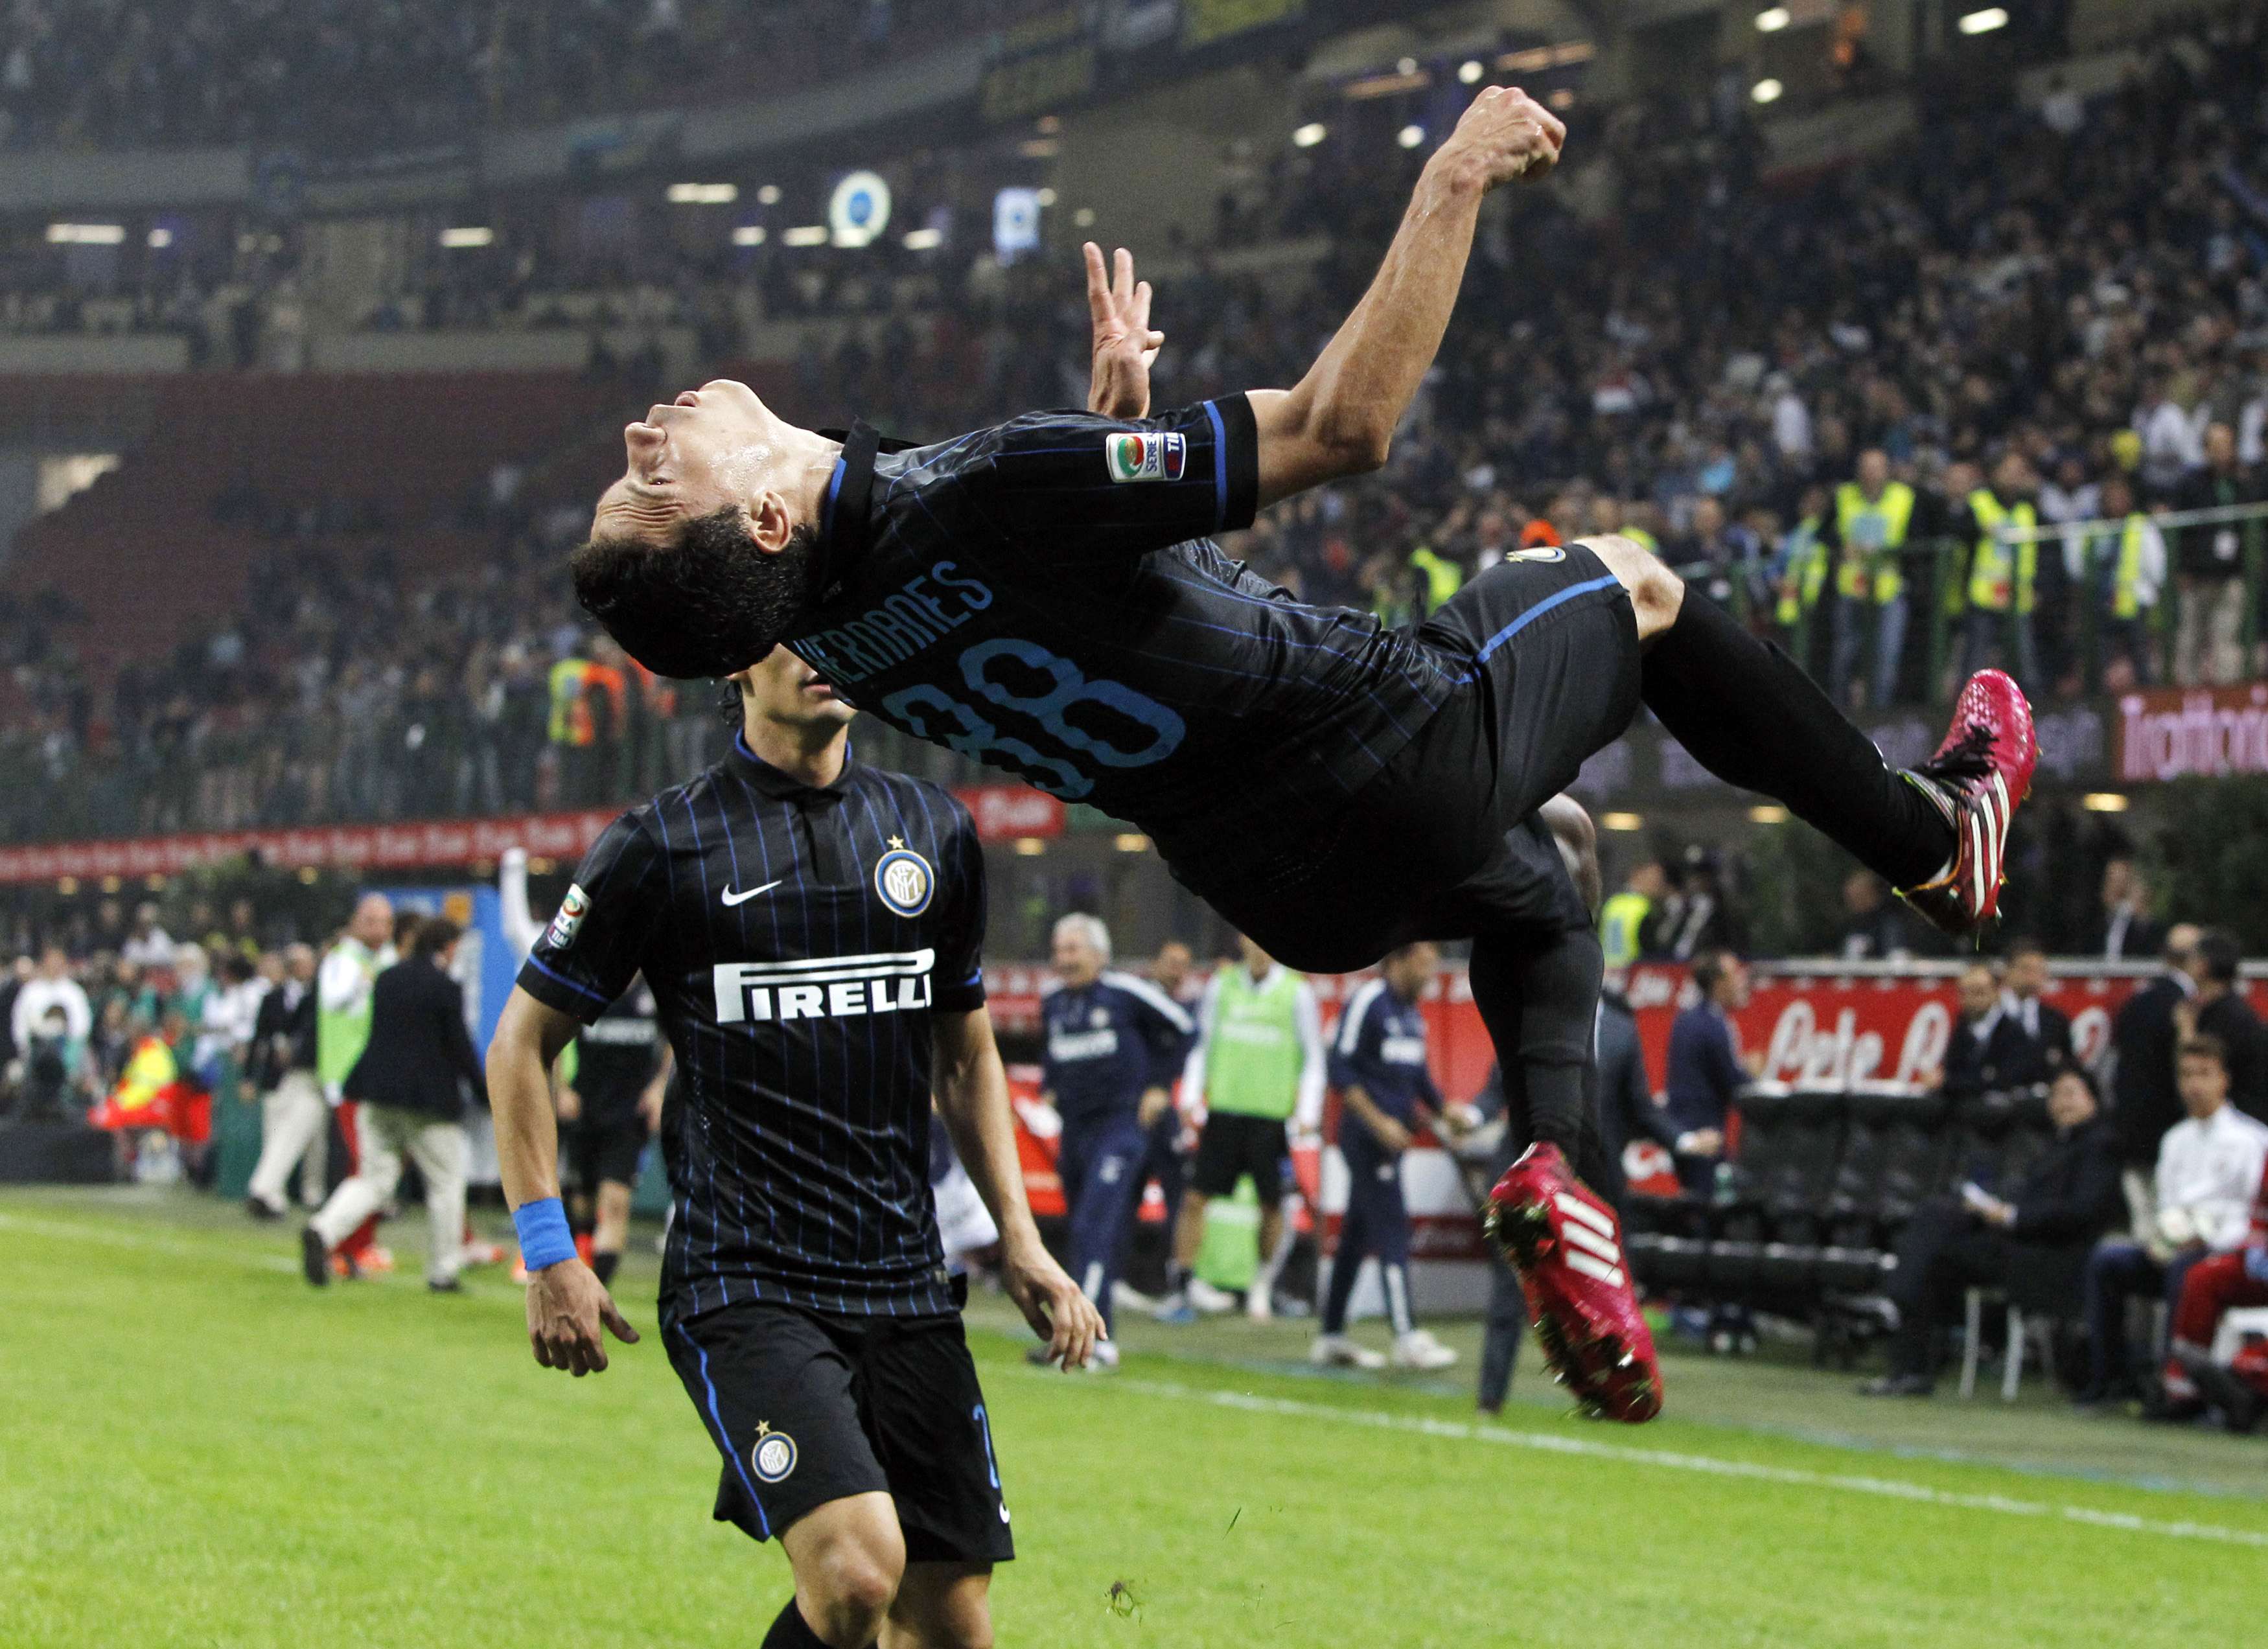 Inter, Napoli share four goals in final 12 minutes